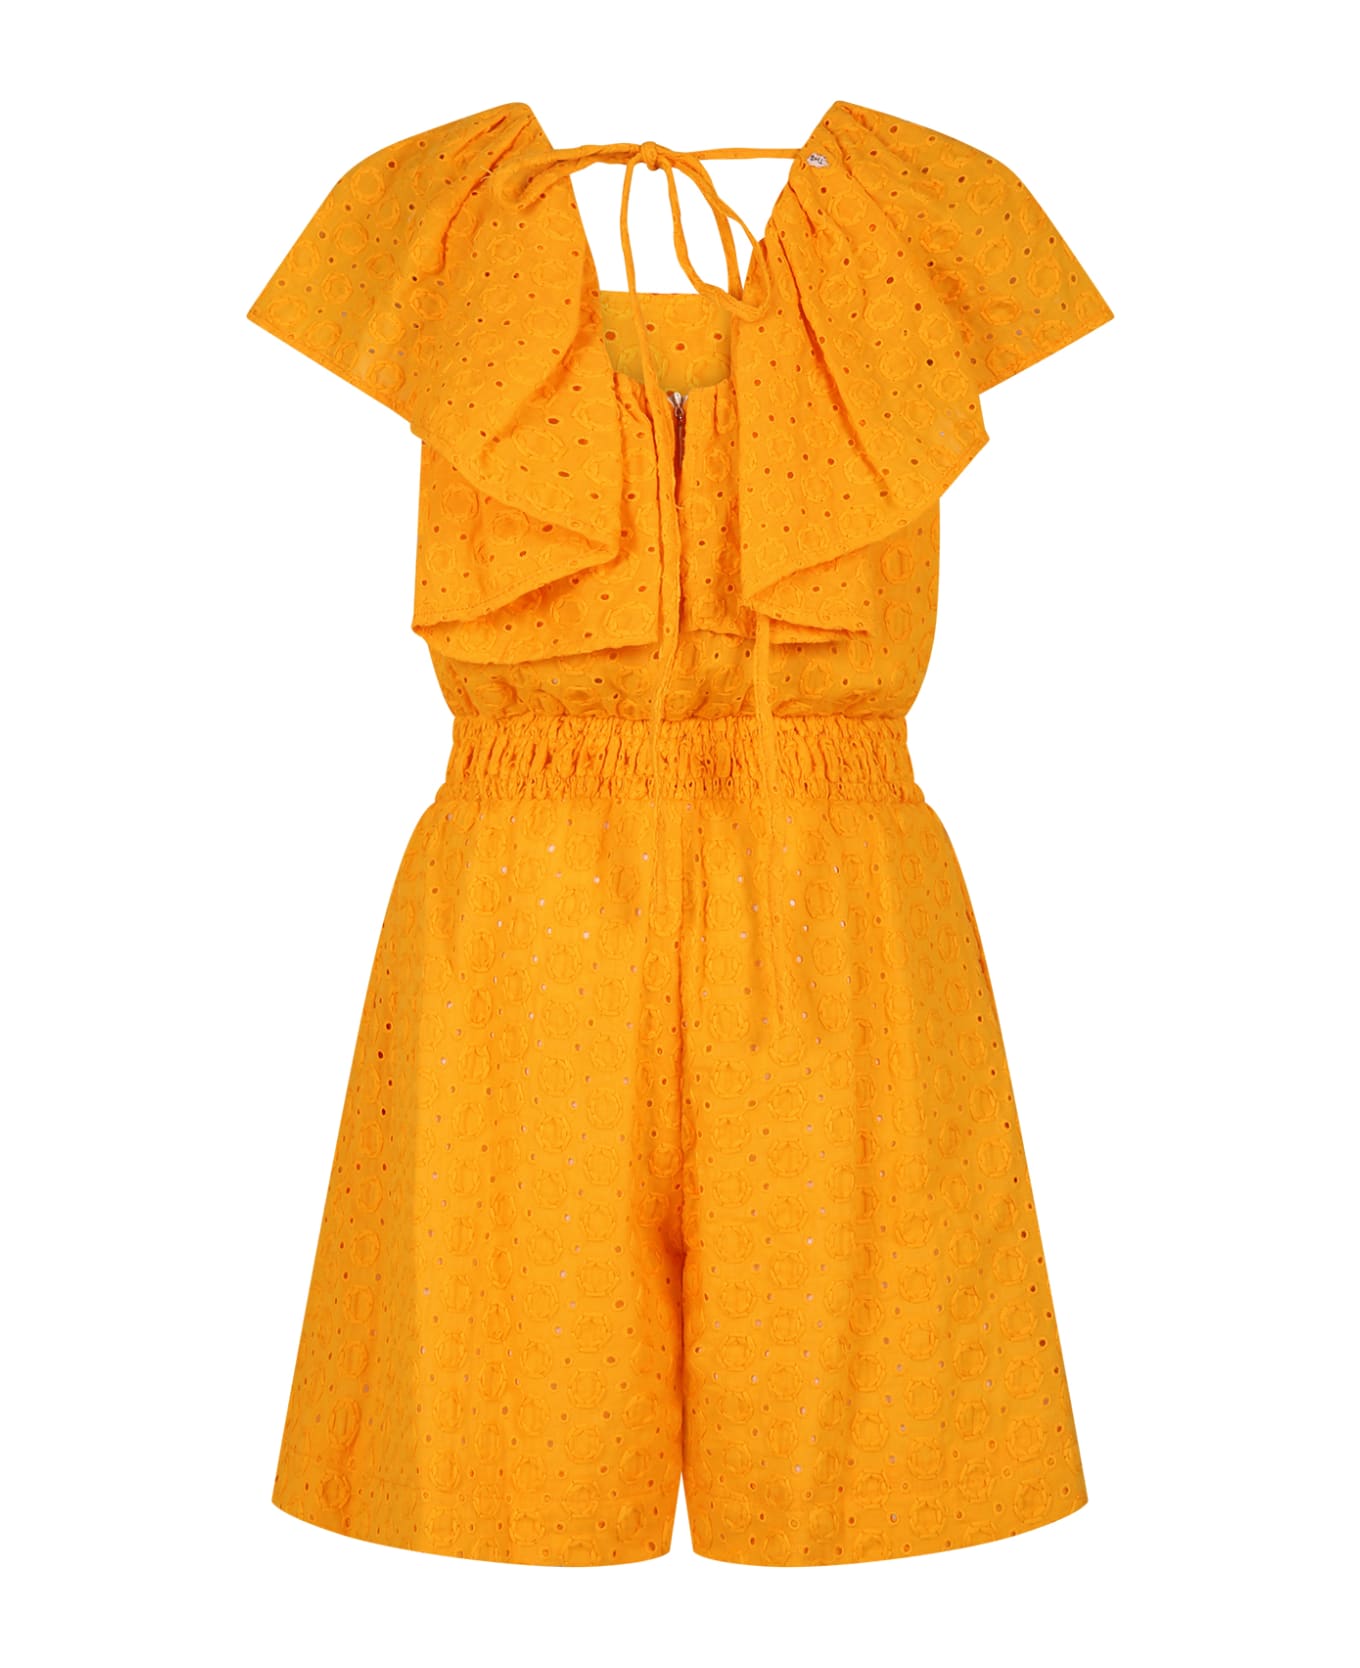 MSGM Orange Jumsuit For Girl With Broderie Anglaise - Orange ジャンプスーツ